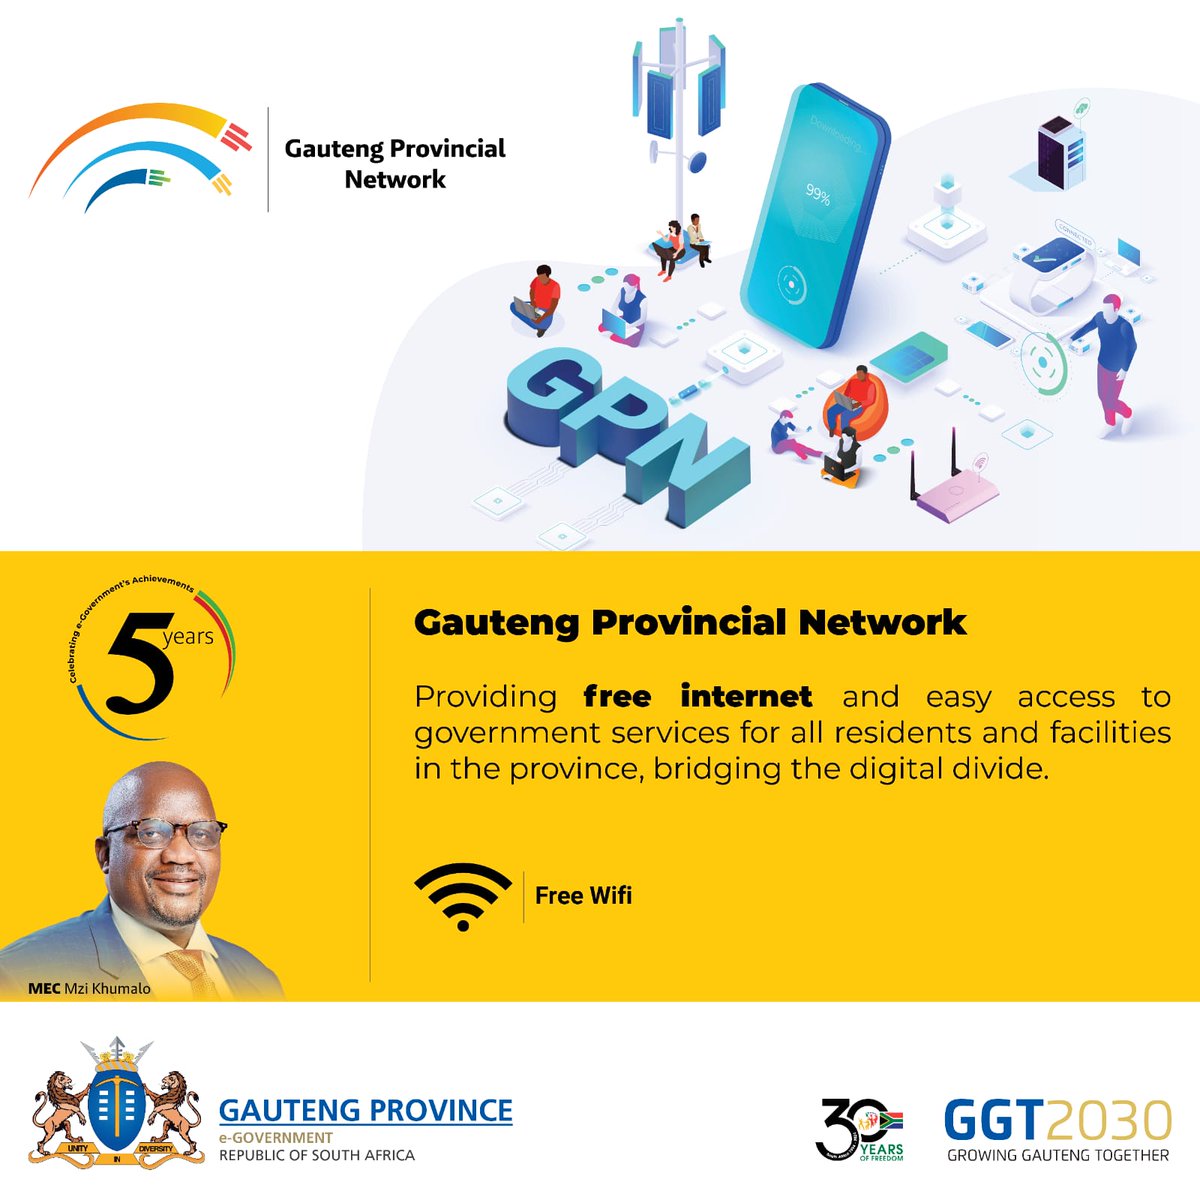 Celebrating a major achievement - The Gauteng Provincial Network has set a new standard in digital innovation and connectivity! Proud to lead the way in driving progress for our community. #GautengExcellence #digitalleadership